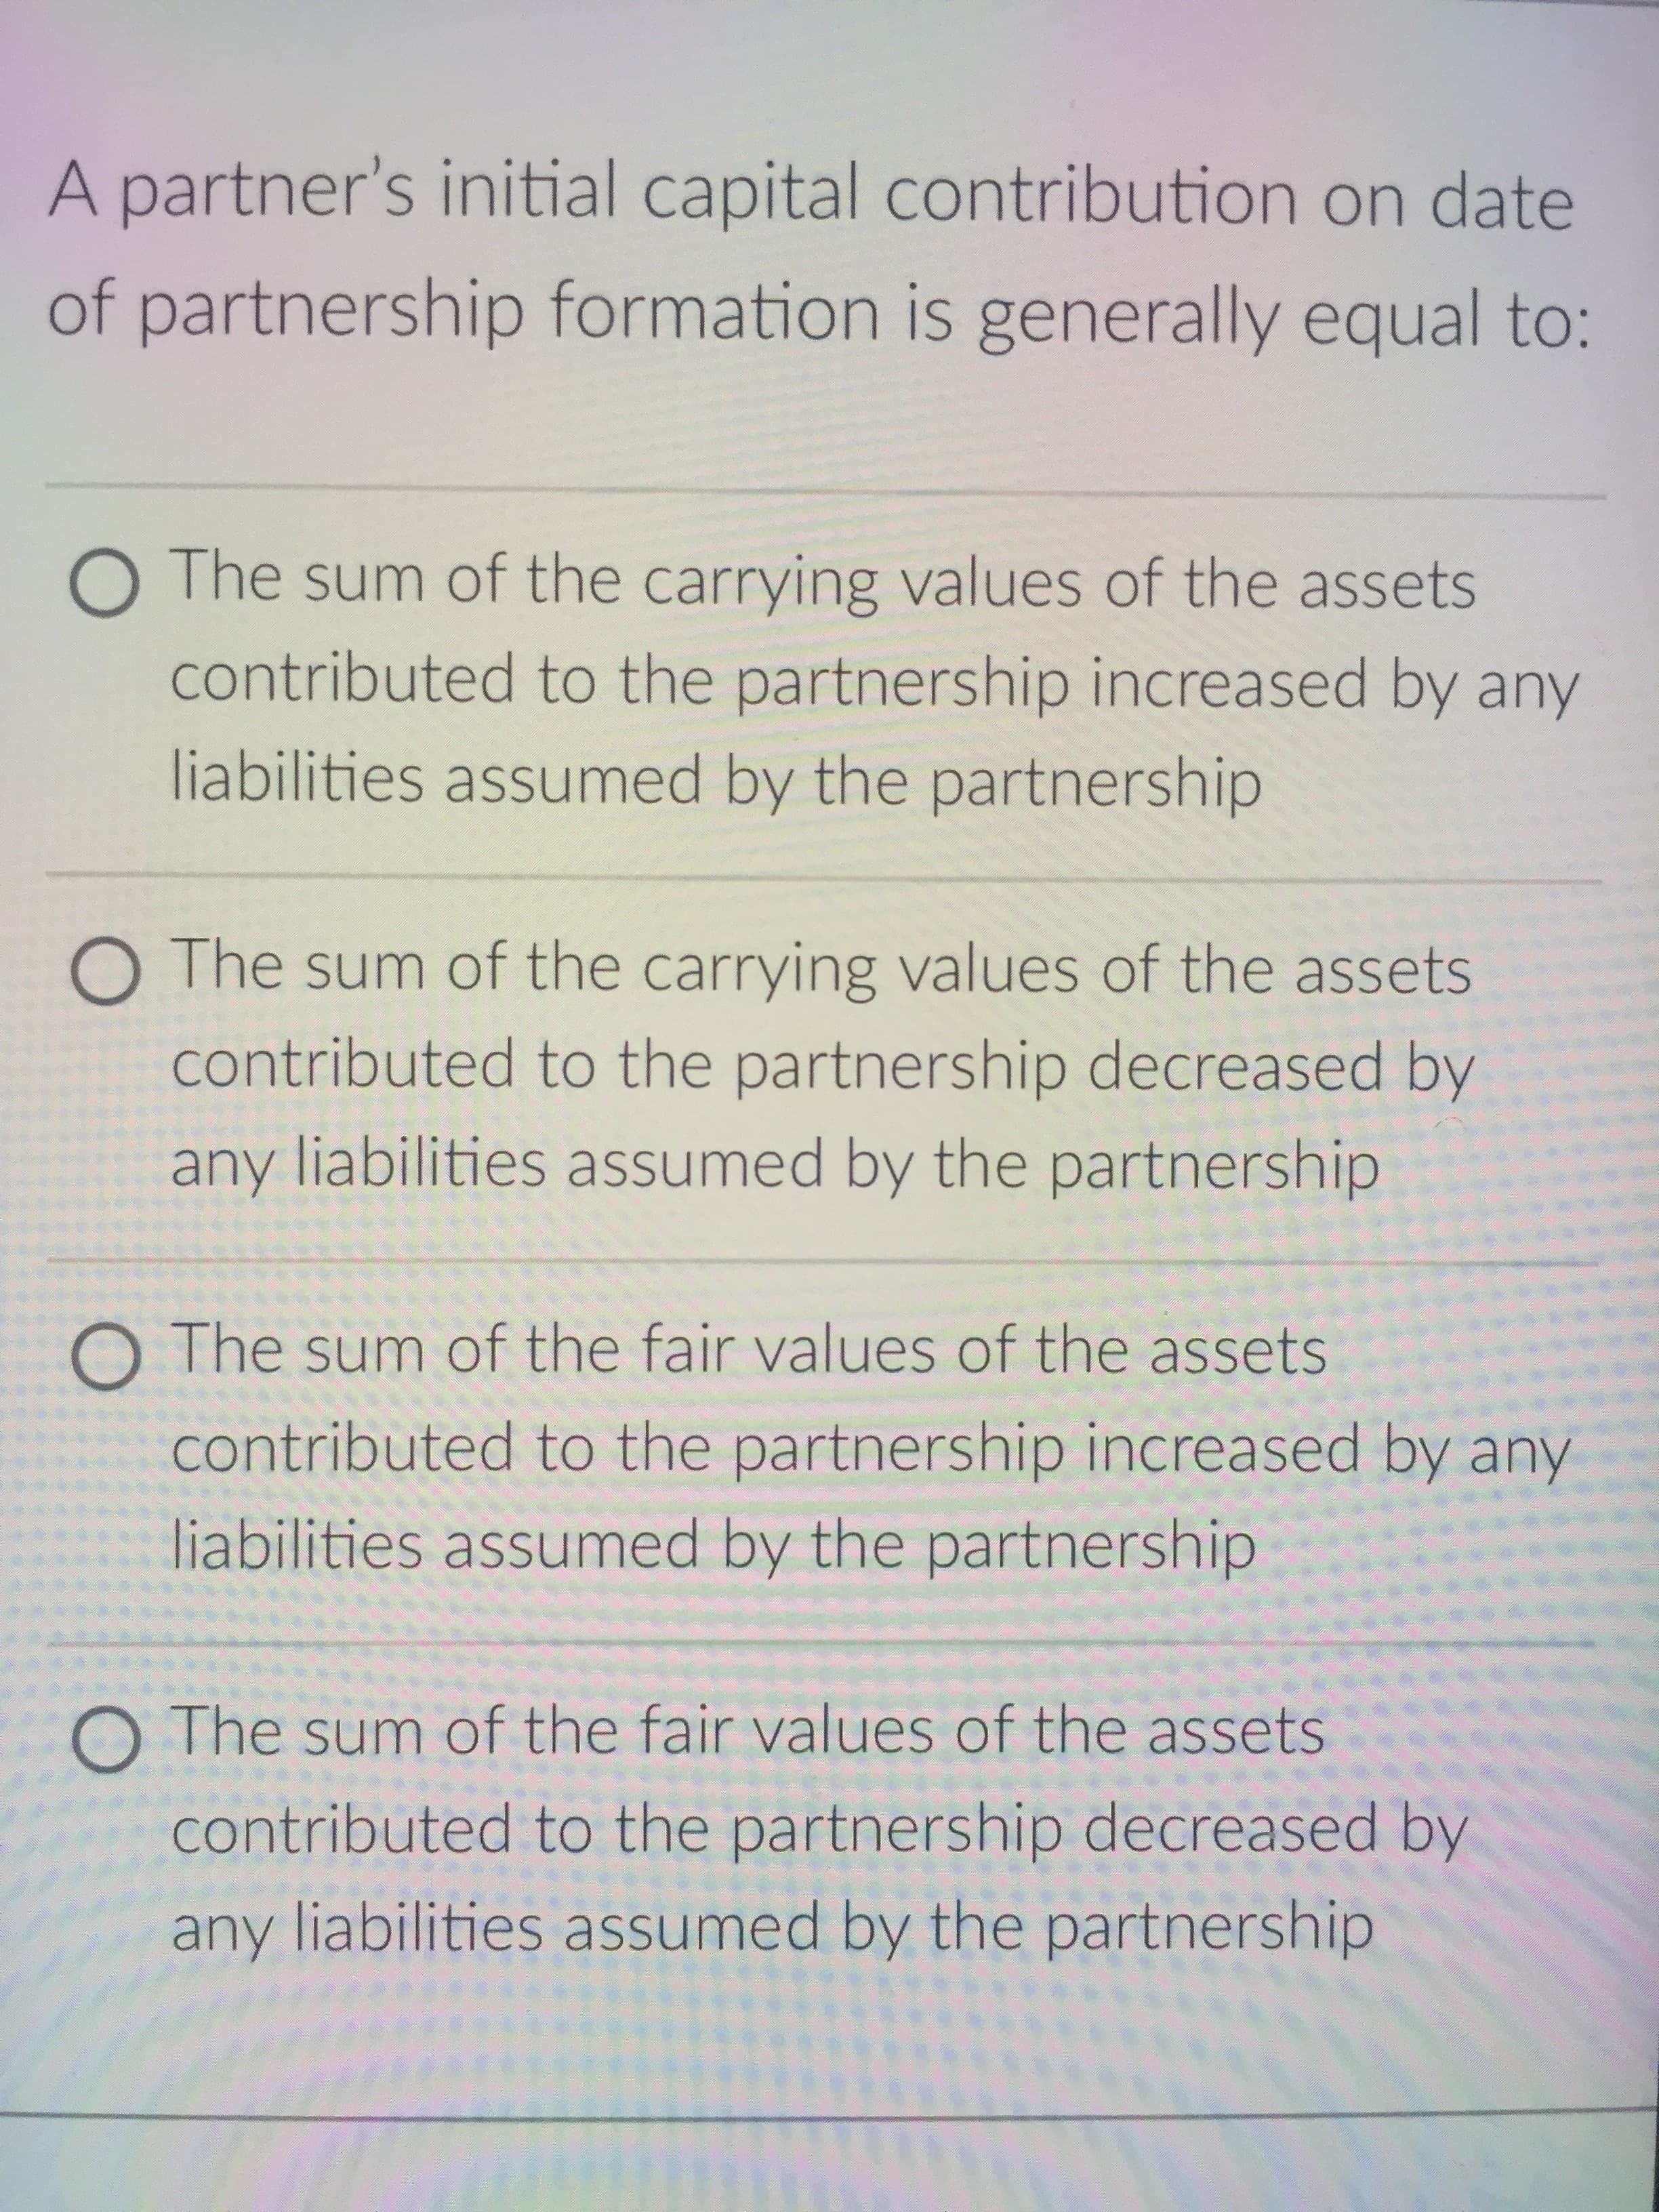 A partner's initial capital contribution on date
of partnership formation is generally equal to:
O The sum of the carrying values of the assets
contributed to the partnership increased by any
liabilities assumed by the partnership
O The sum of the carrying values of the assets
contributed to the partnership decreased by
any liabilities assumed by the partnership
O The sum of the fair values of the assets
contributed to the partnership increased by any
liabilities assumed by the partnership
O The sum of the fair values of the assets
contributed to the partnership decreased by
any liabilities assumed by the partnership
